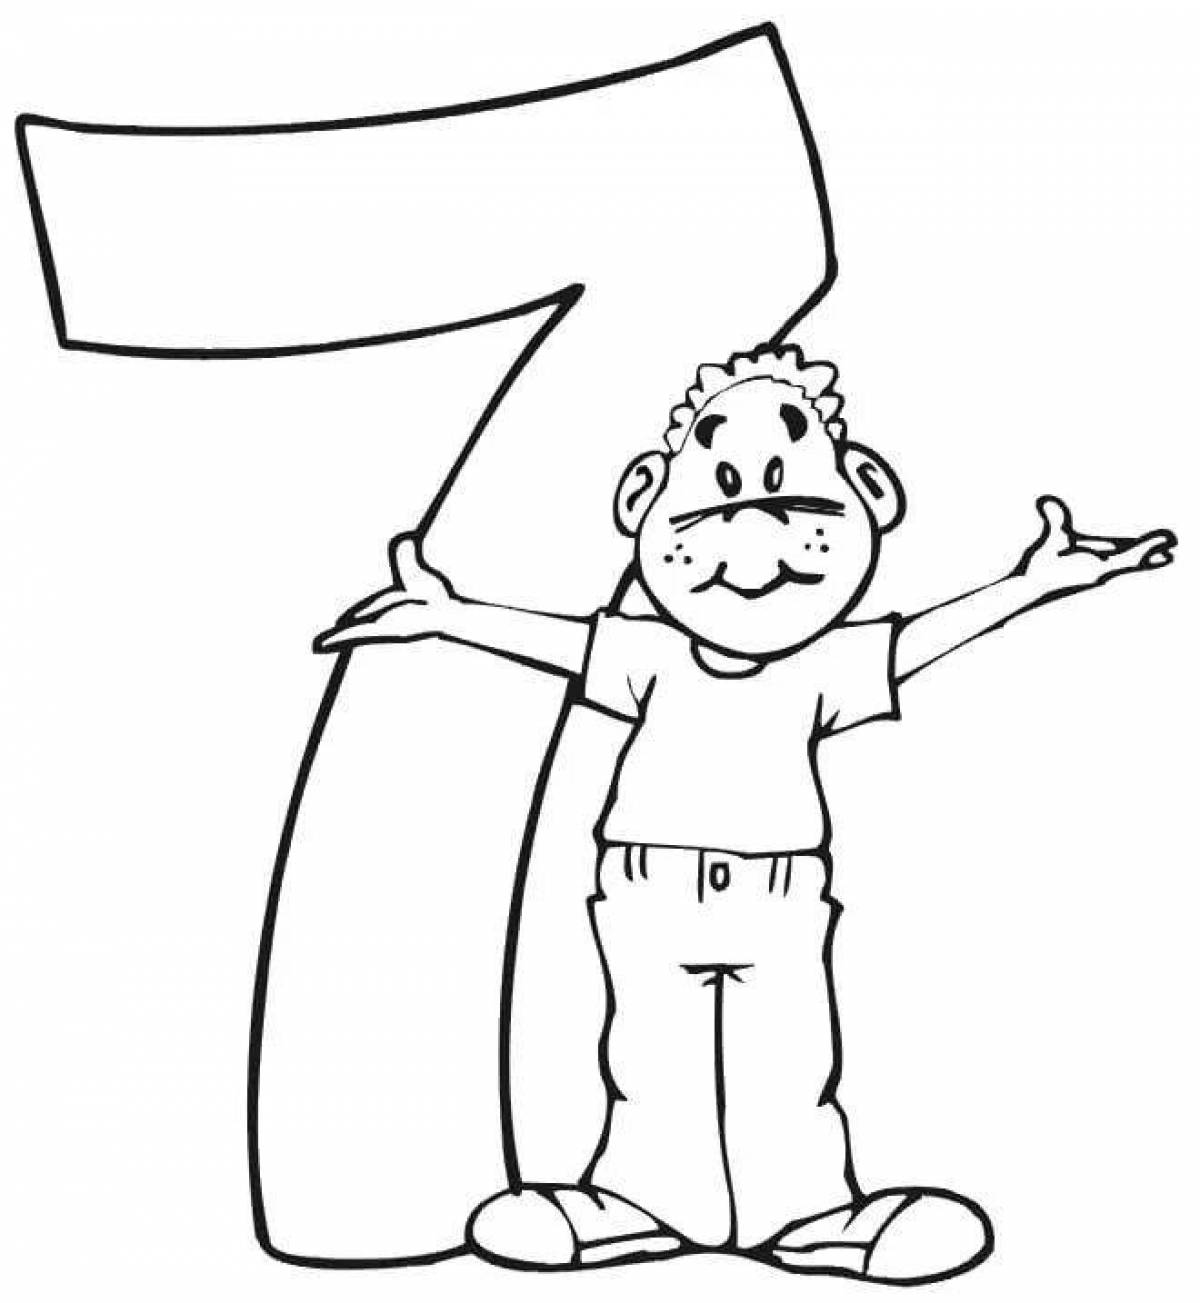 Great coloring page 7